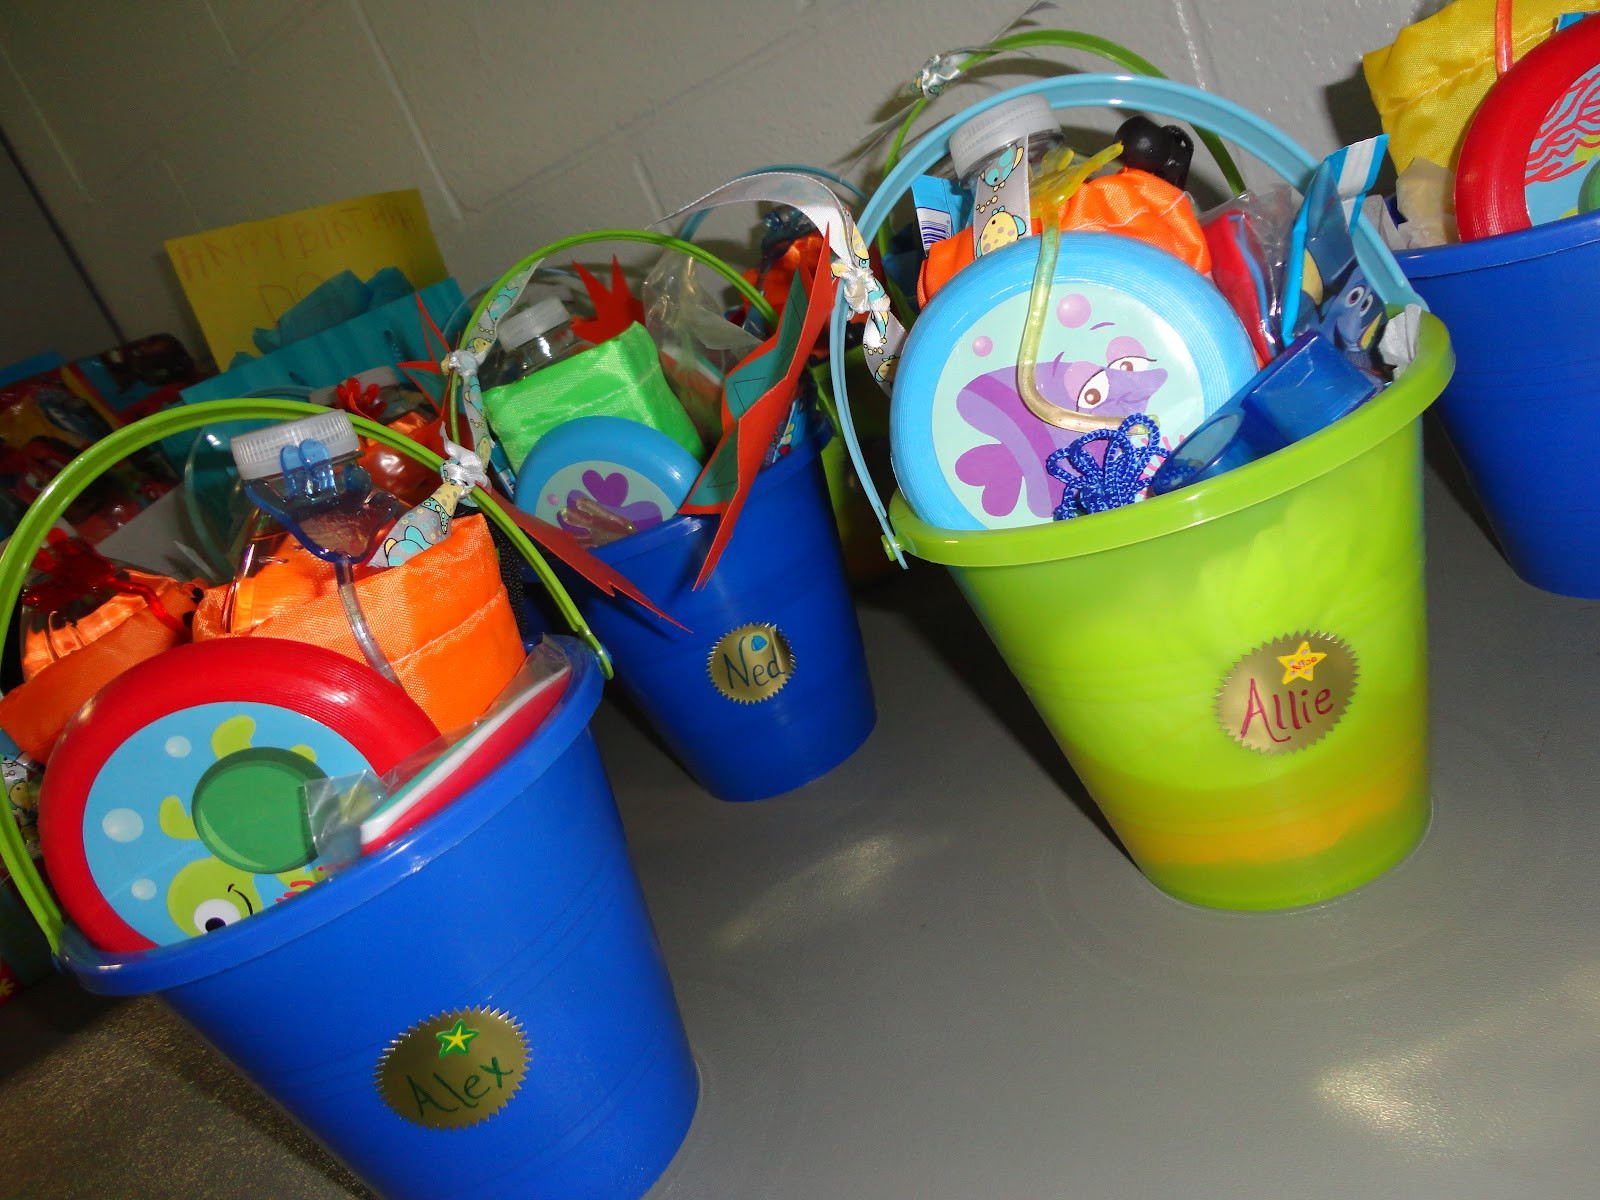 Pool Party Gift Bag Ideas
 Oh Goo Pool Party